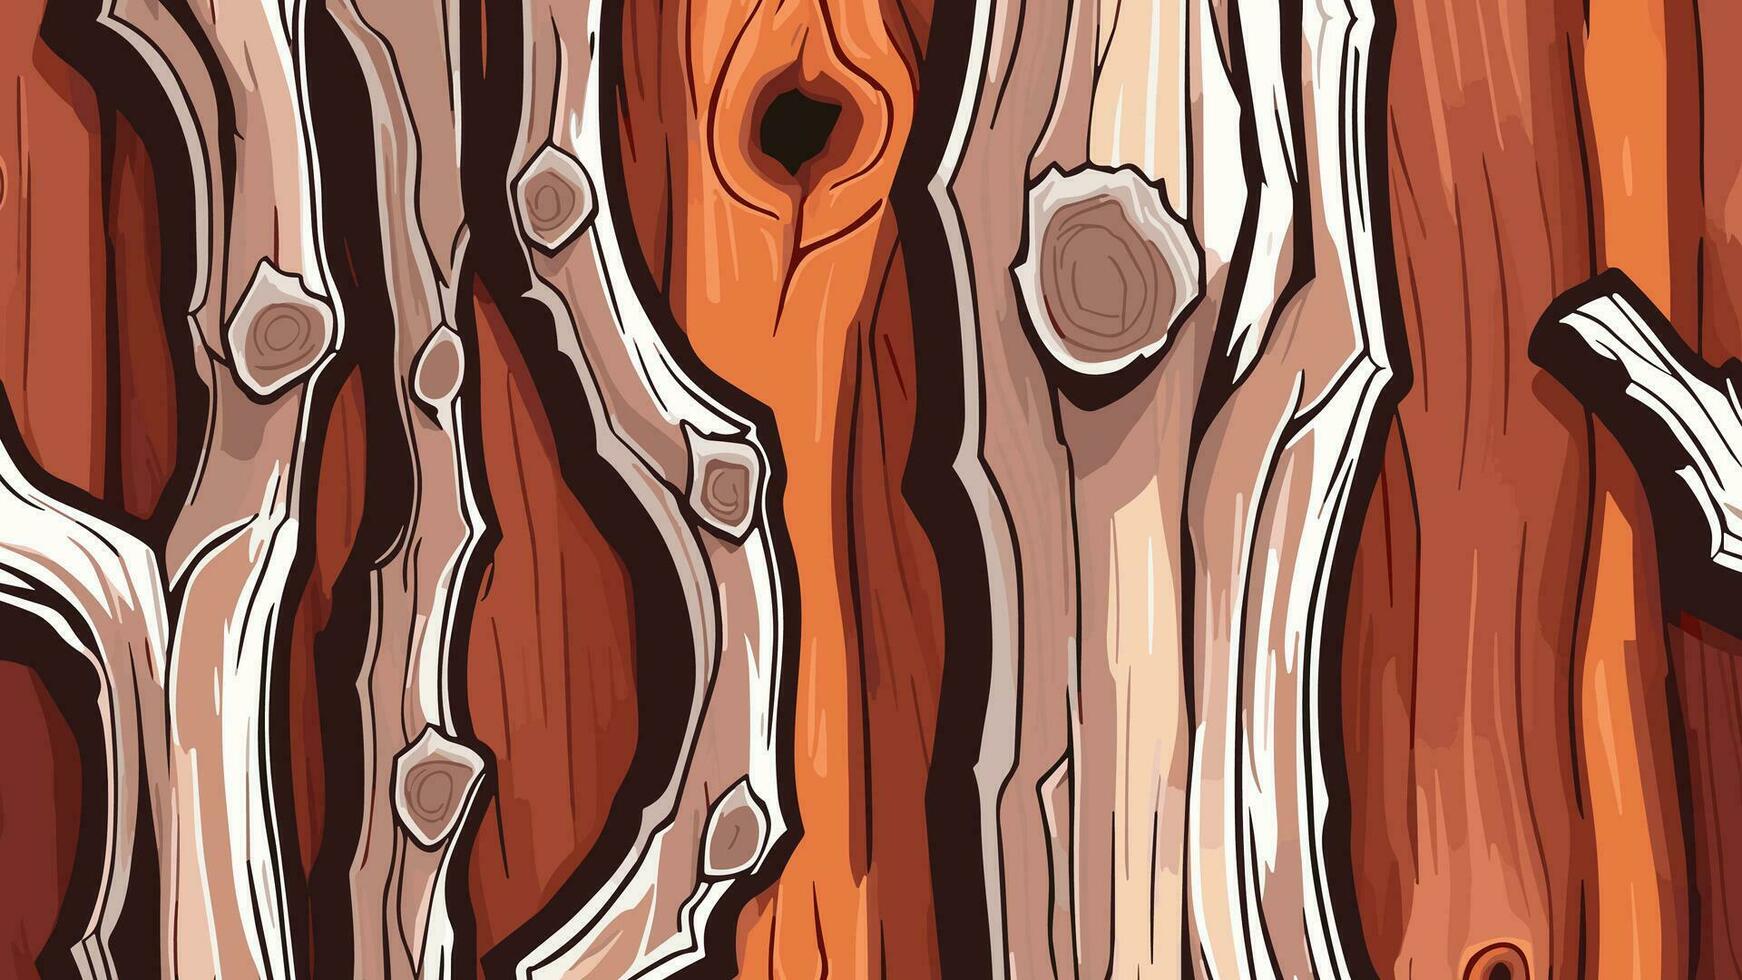 Tree Trunk Wood Texture Nature Seamless Backgrounds - High quality images of natural wood texture from tree trunks. Perfect for creating realistic and seamless backgrounds for your projects vector